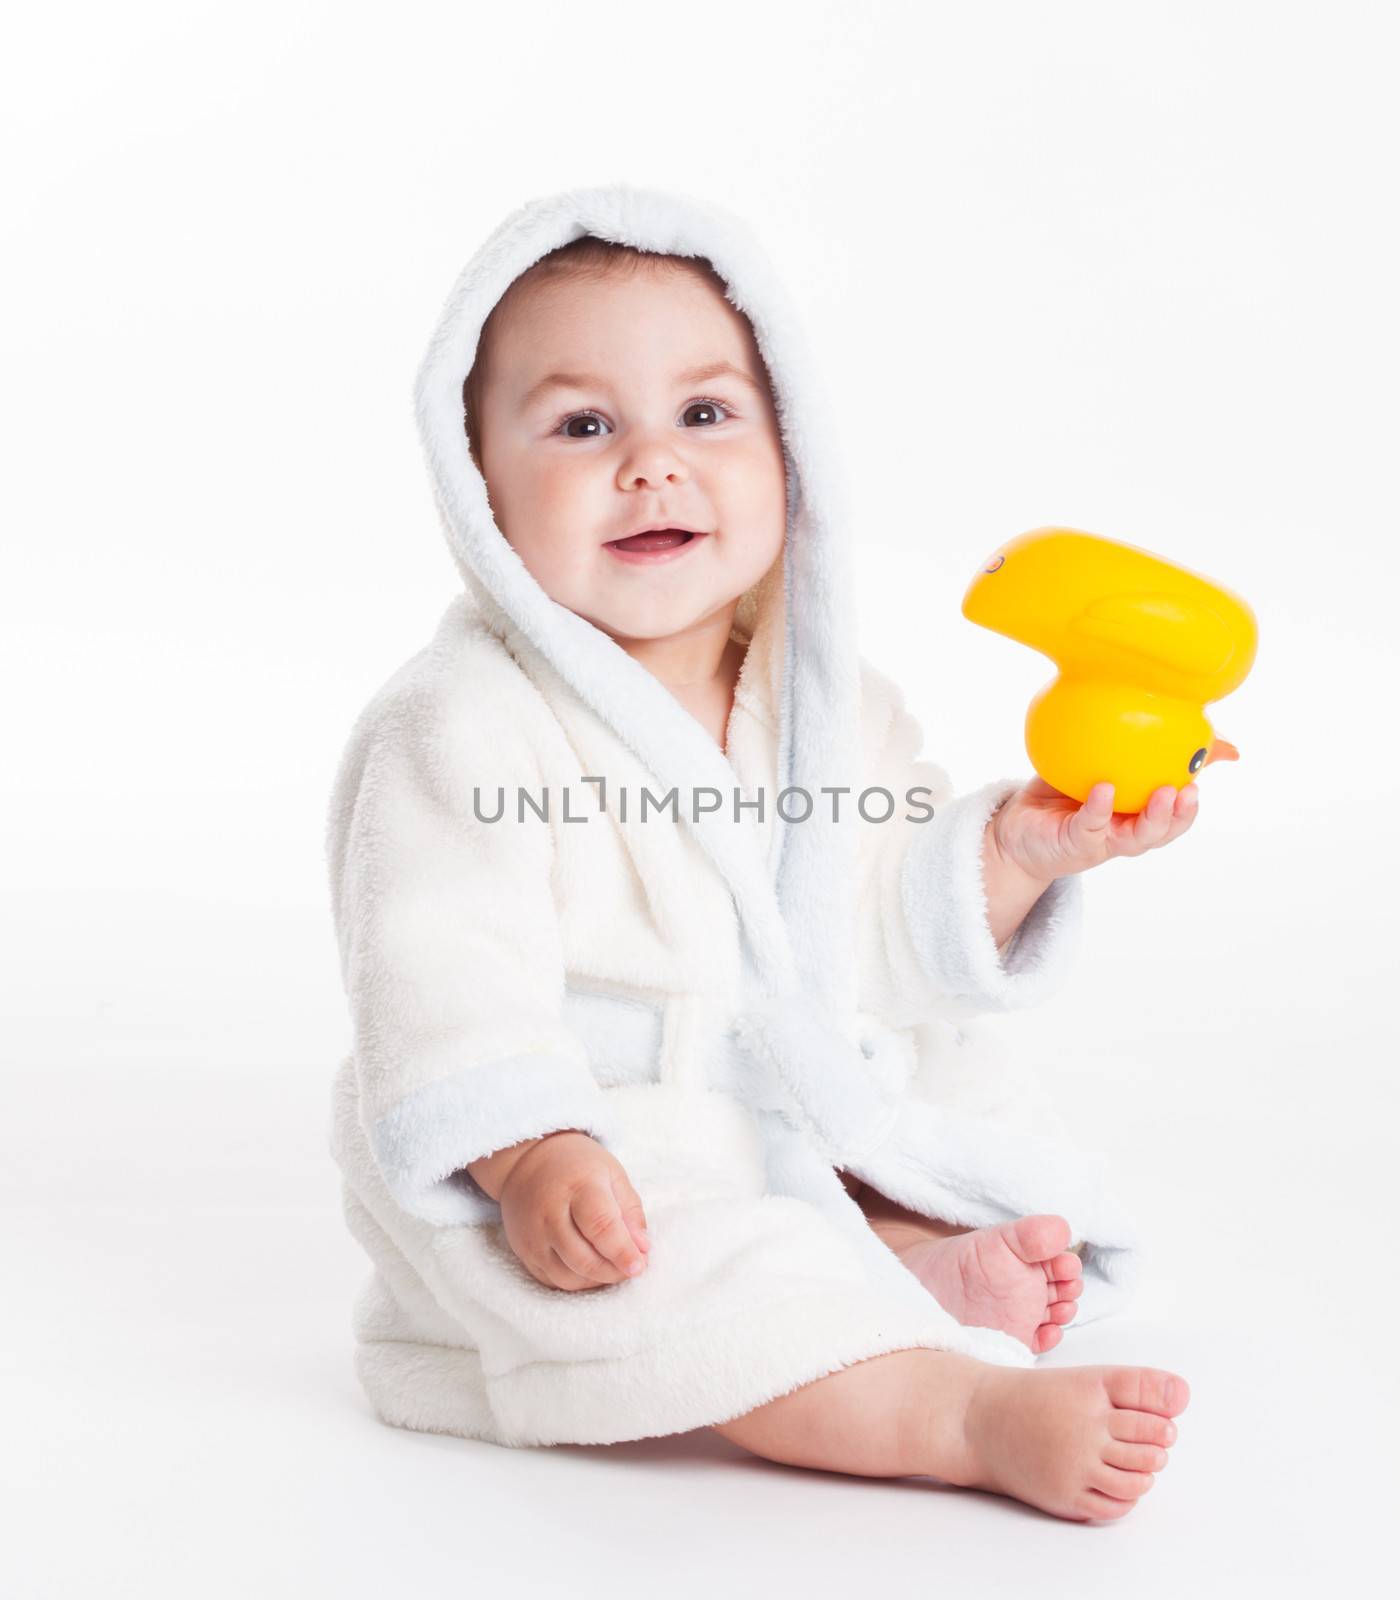 Baby in a bathrobe after a bath with yellow toy isolated